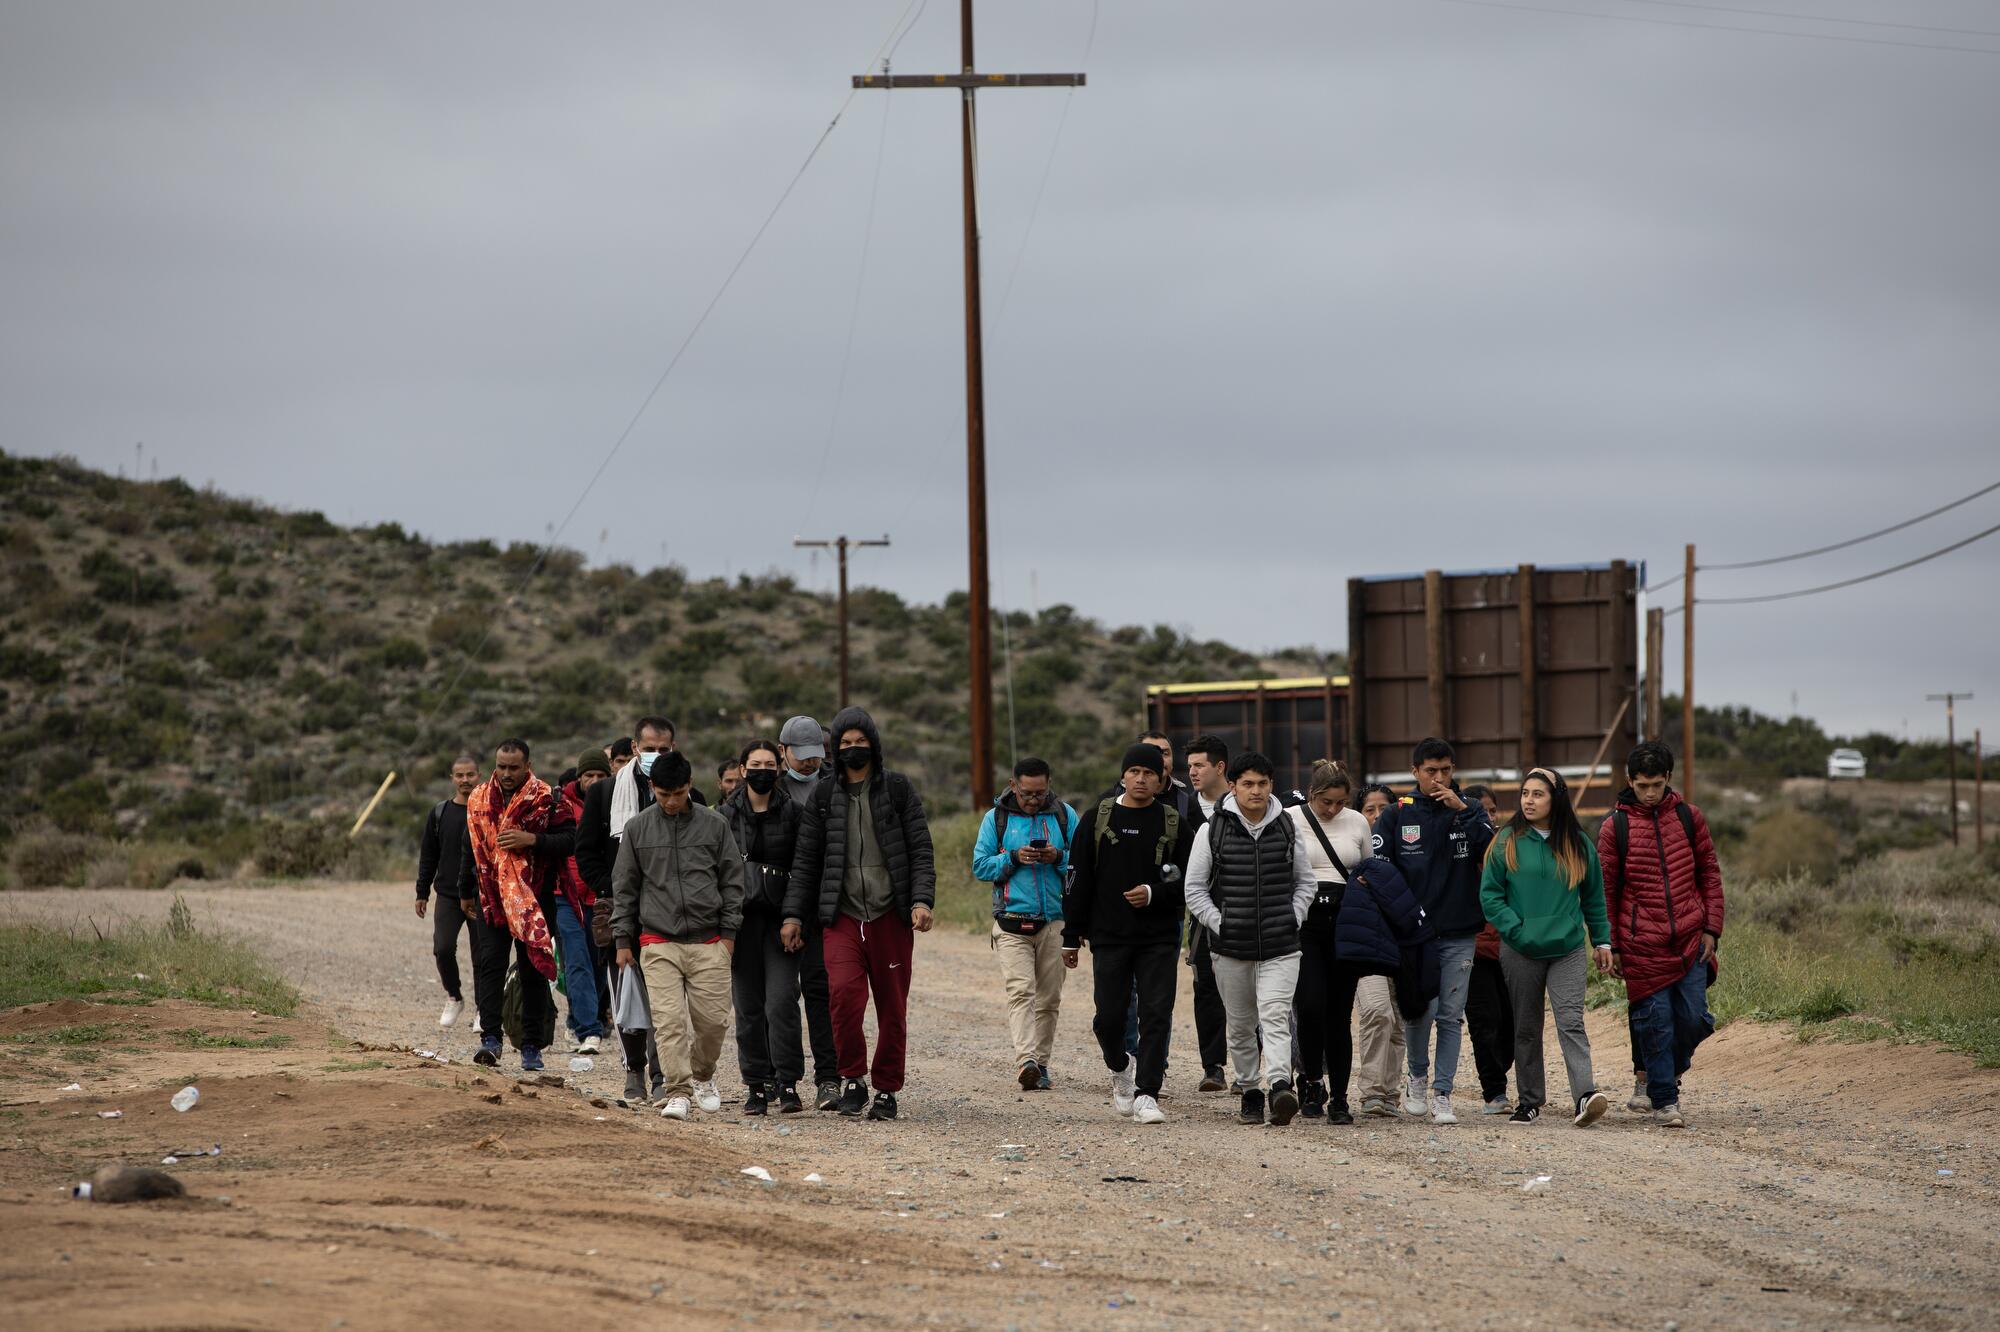 More than 60 migrants arrive at a camp just off Interstate 8